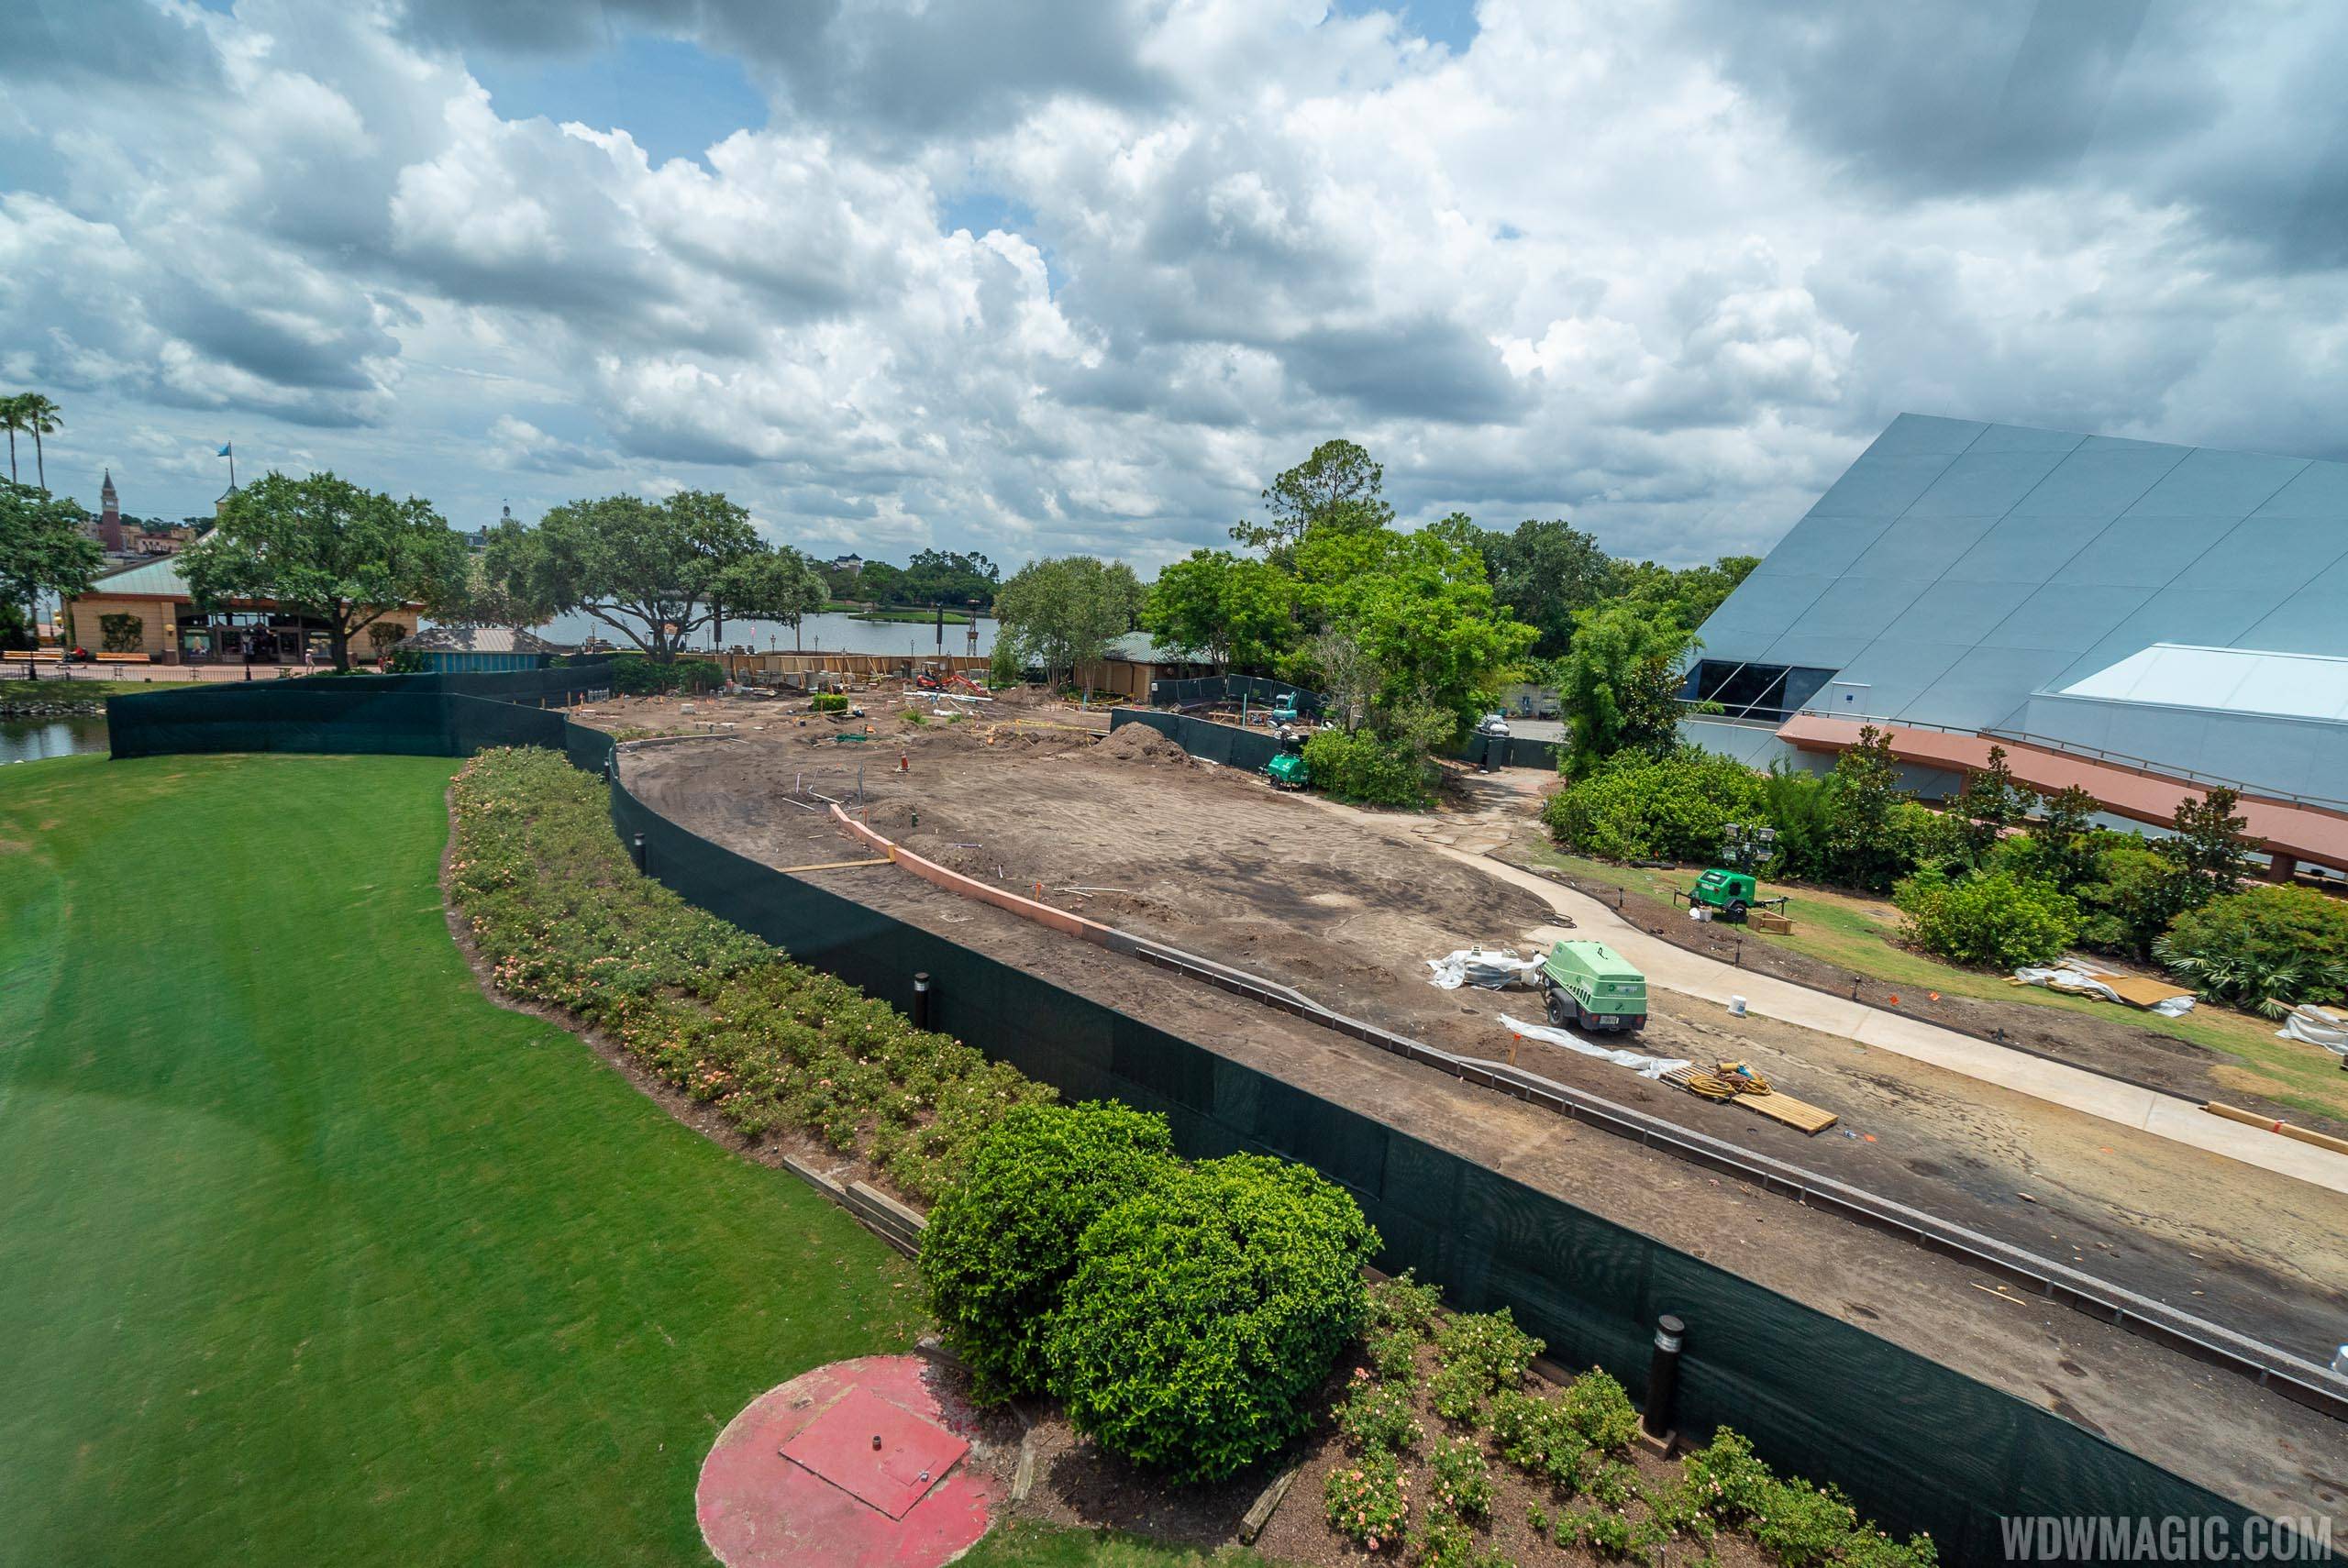 PHOTOS - Epcot's Rosewalk expansion between Future World and World Showcase